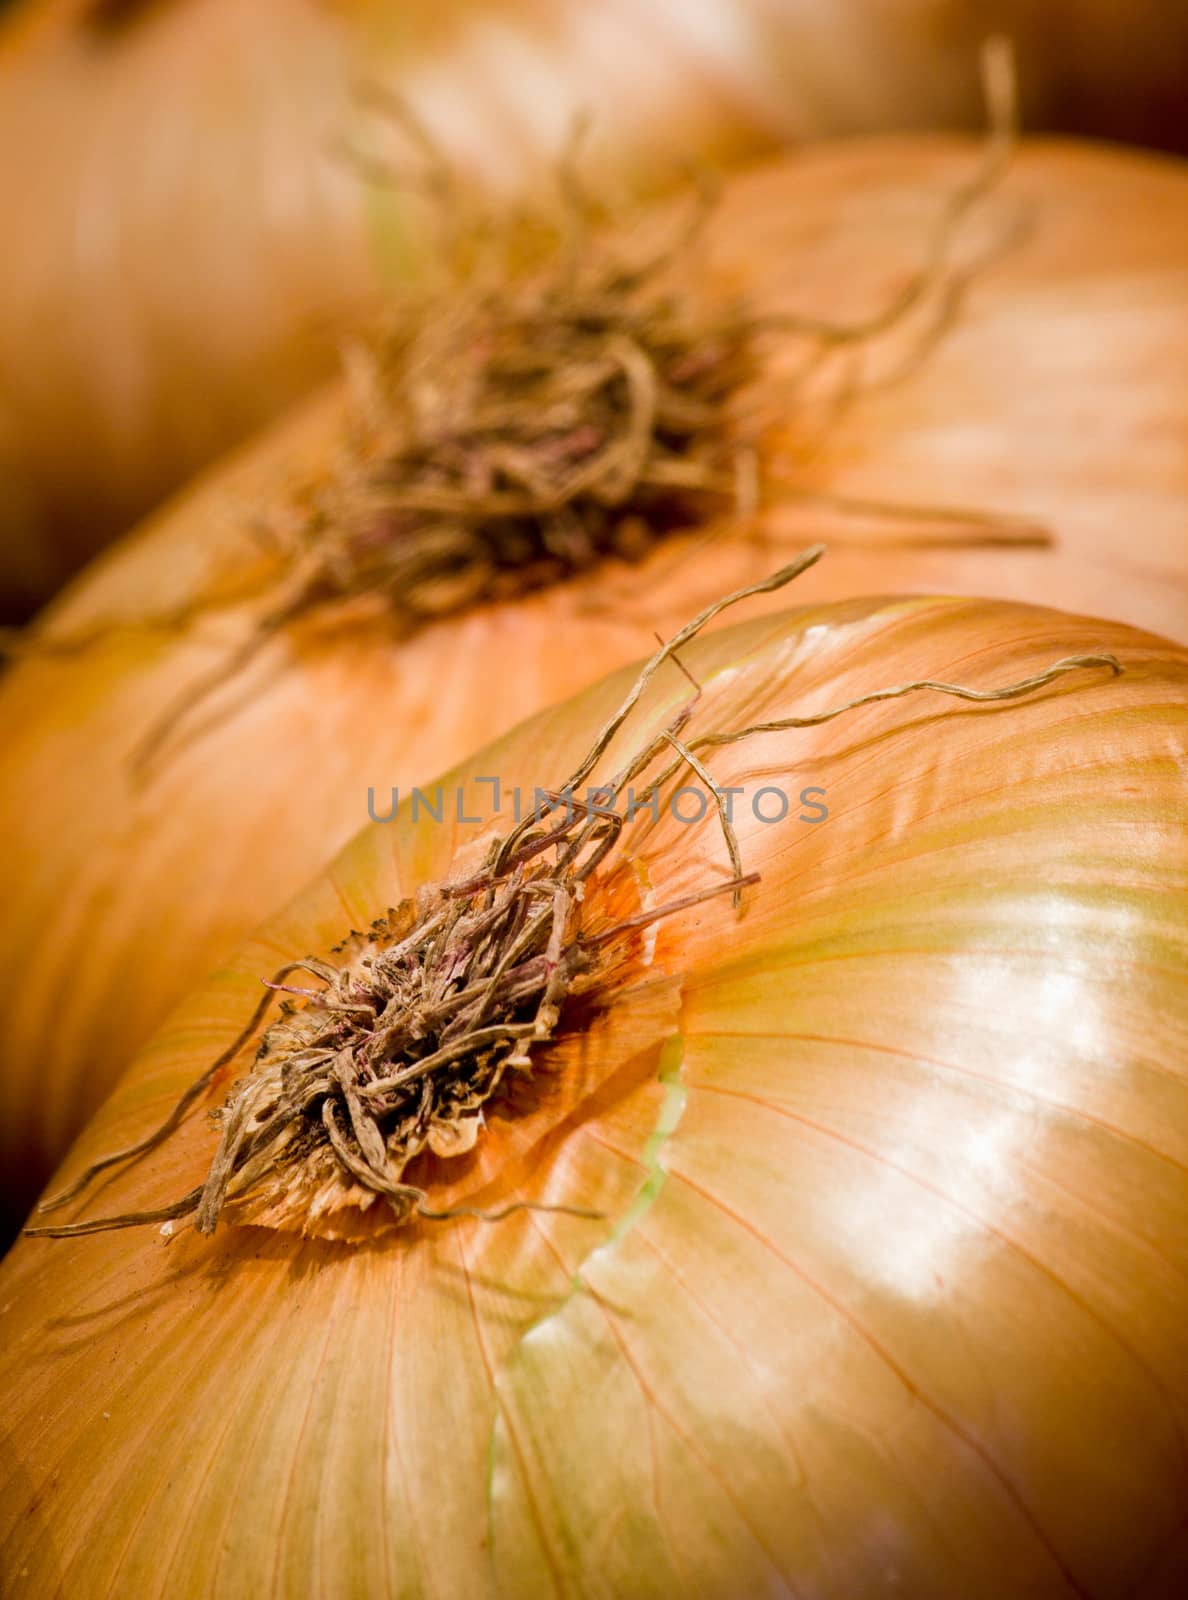 onions detail by marco_govel